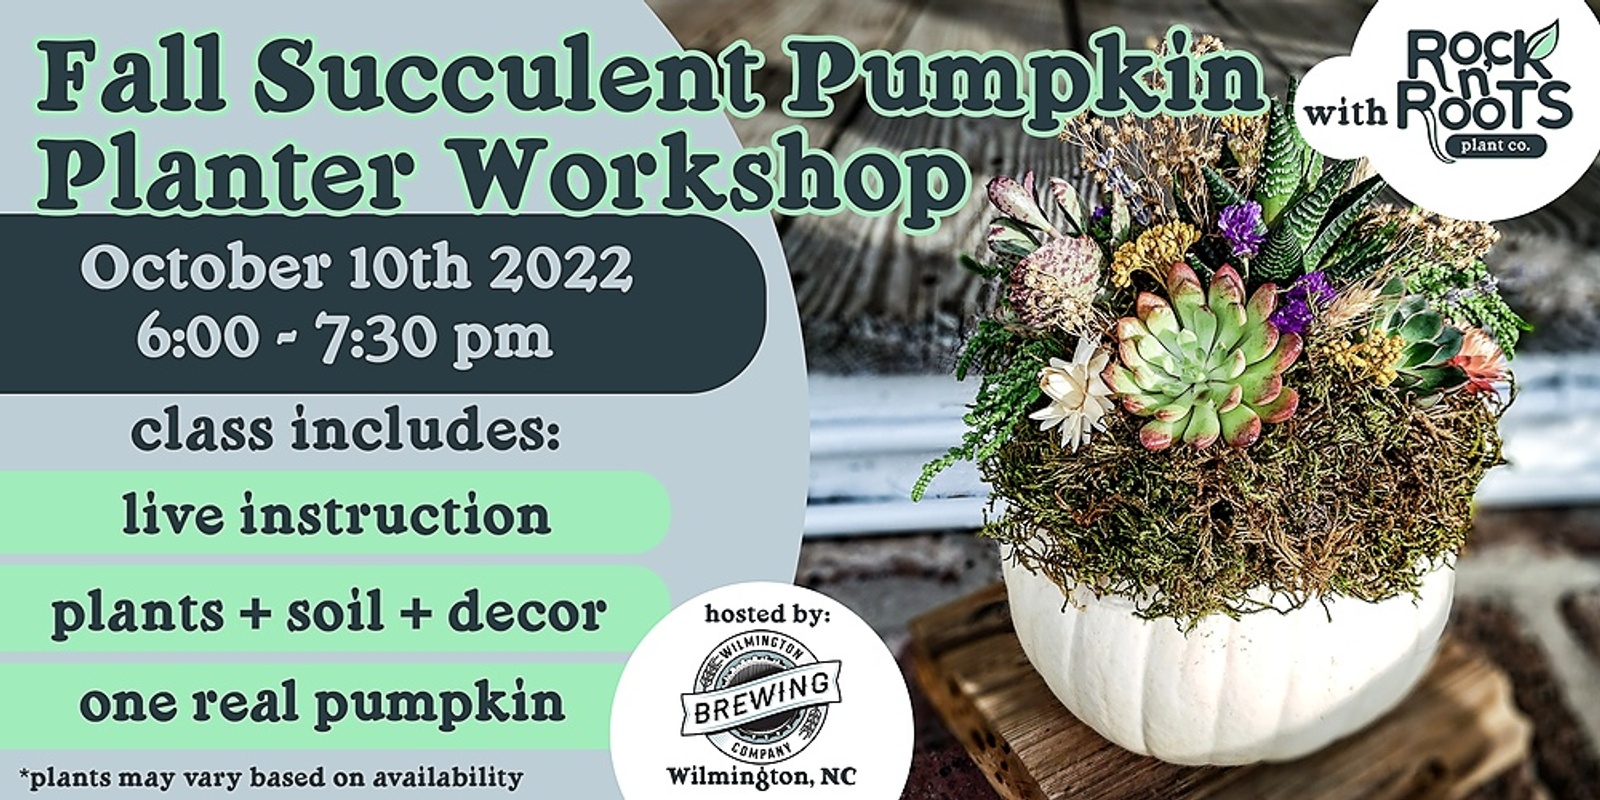 Banner image for Fall Succulent Pumpkin Planter Workshop at Wilmington Brewing Company (Wilmington, NC)